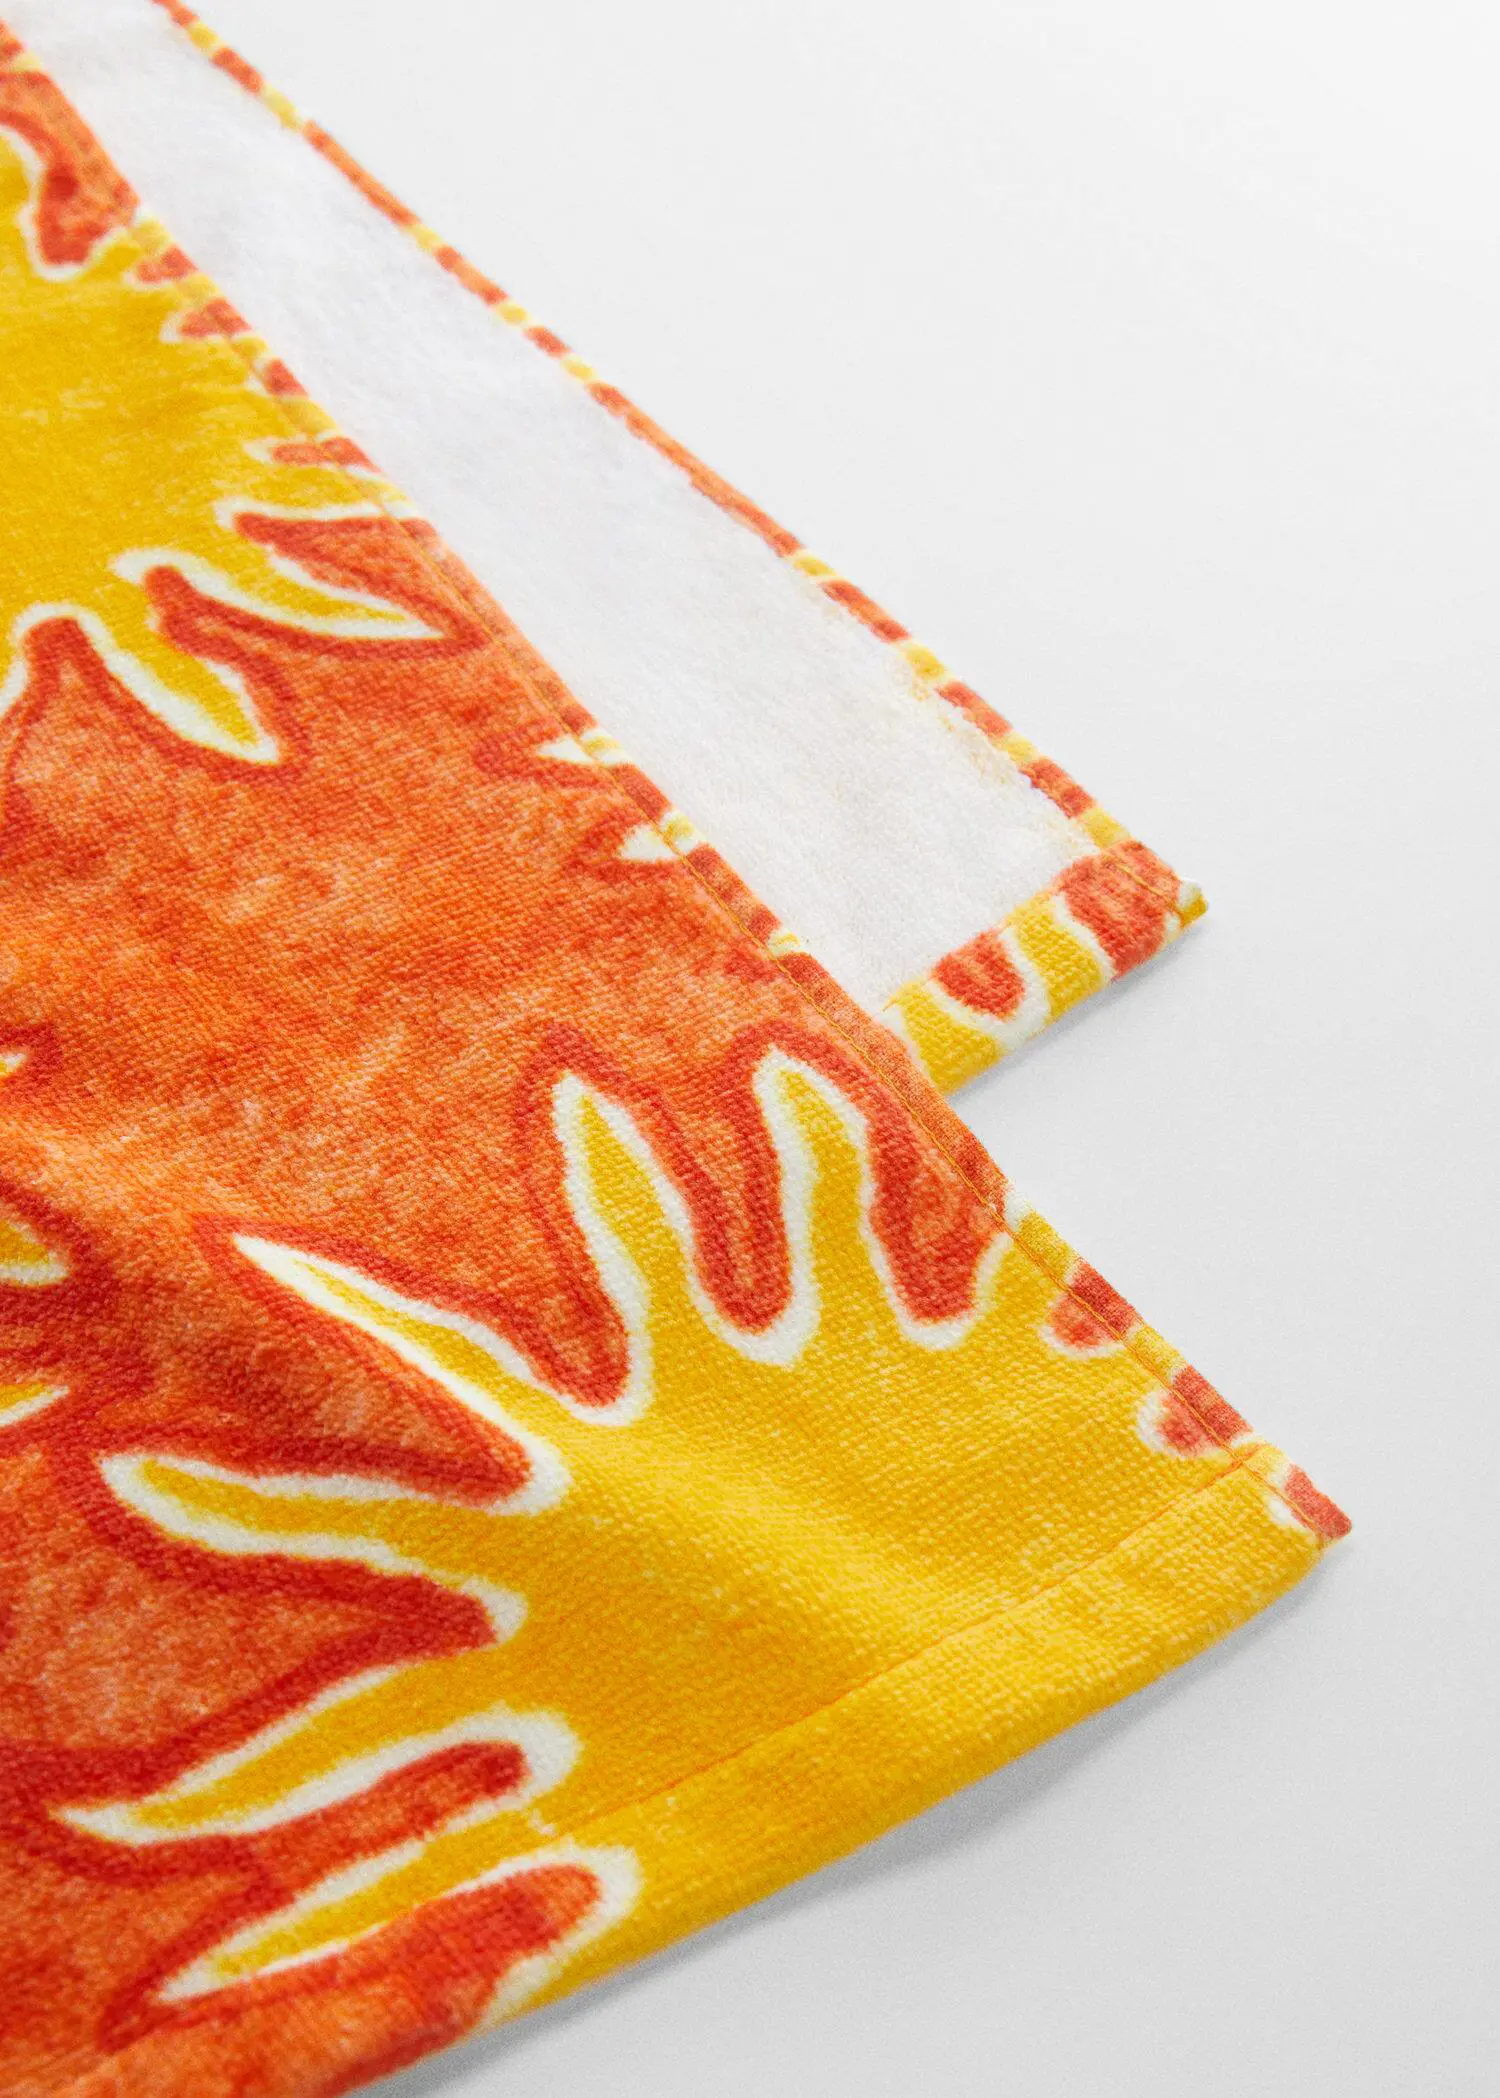 Mango 100% cotton printed towel. a close-up view of a yellow and orange towel. 